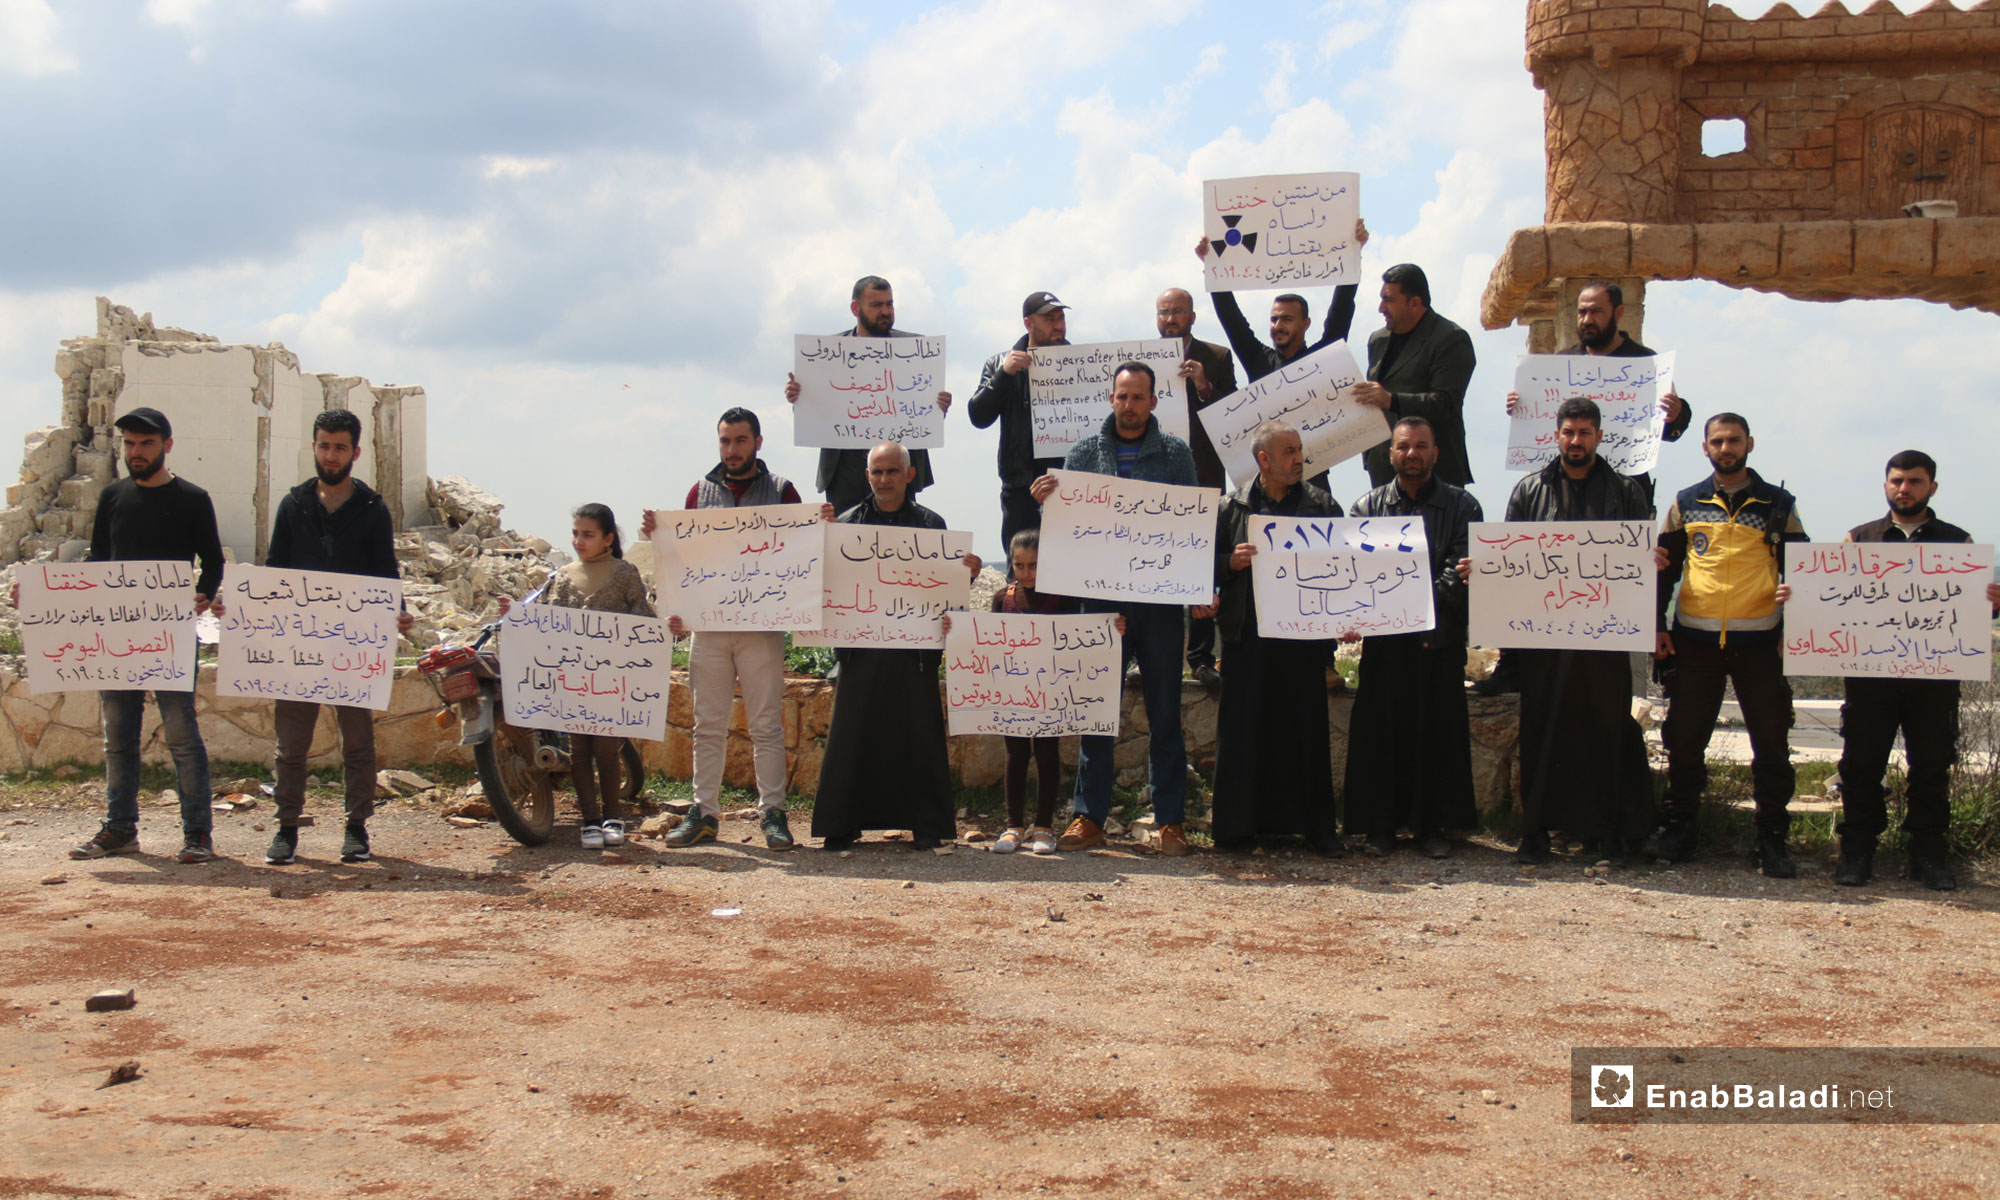 A vigil at the second anniversary of the chemical massacre of Khan Shaykhun, rural Idlib – April 4, 2019 (Enab Baladi)
The signs held by the people say: “Suffocated, burnt and mutilated, are there any death methods left that you have not tried yet; hold al-Assad accountable, chemical weapons  Khan Shaykhun/ Al-Assad is a war criminal, killing us with all the tools of crime/ two years ago, he suffocated us, and he is yet killing us/ 04.04.2017 is a day that our generations will not forget/ Bashar al-Assad is killing his people with an international license/ Two years have passed since the chemical weapons’ massacre and the massacres of the Russians and the regime are yet going on/We demand that the international community stop the shelling and protect the civilians/ Save our childhood from the criminality of the al-Assad regime; Massacres by al-Assad and Putin are continuing/ Two years have passed since we were suffocated and the criminal is still free/The tools are many and the criminal is but one; chemical weapons, aircraft, missiles, and the massacres are still going on/We thank the heroes of the Civil Defense, they are what is left of the world’s humanity, the children of the city of Khan Shaykhun/He is making an art out of killing his people and has a plan to get back Golan/Two years have passed since our suffocation, and our children are still suffering the bitterness of daily shelling.”
